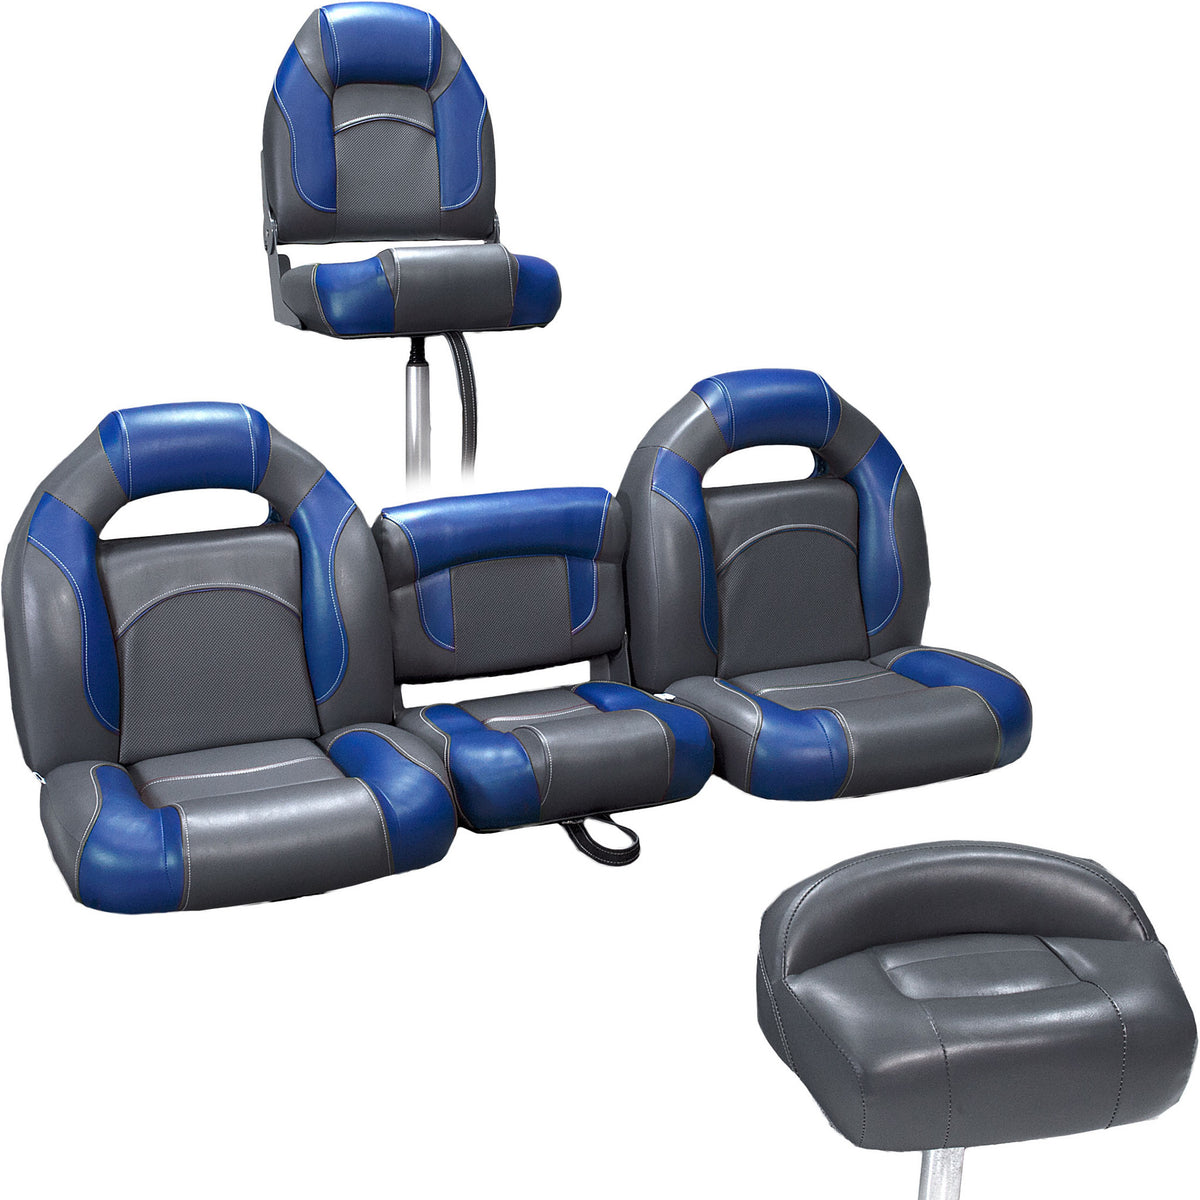 Bass Boat Seats | Complete Bass Seat Starting At $459.99